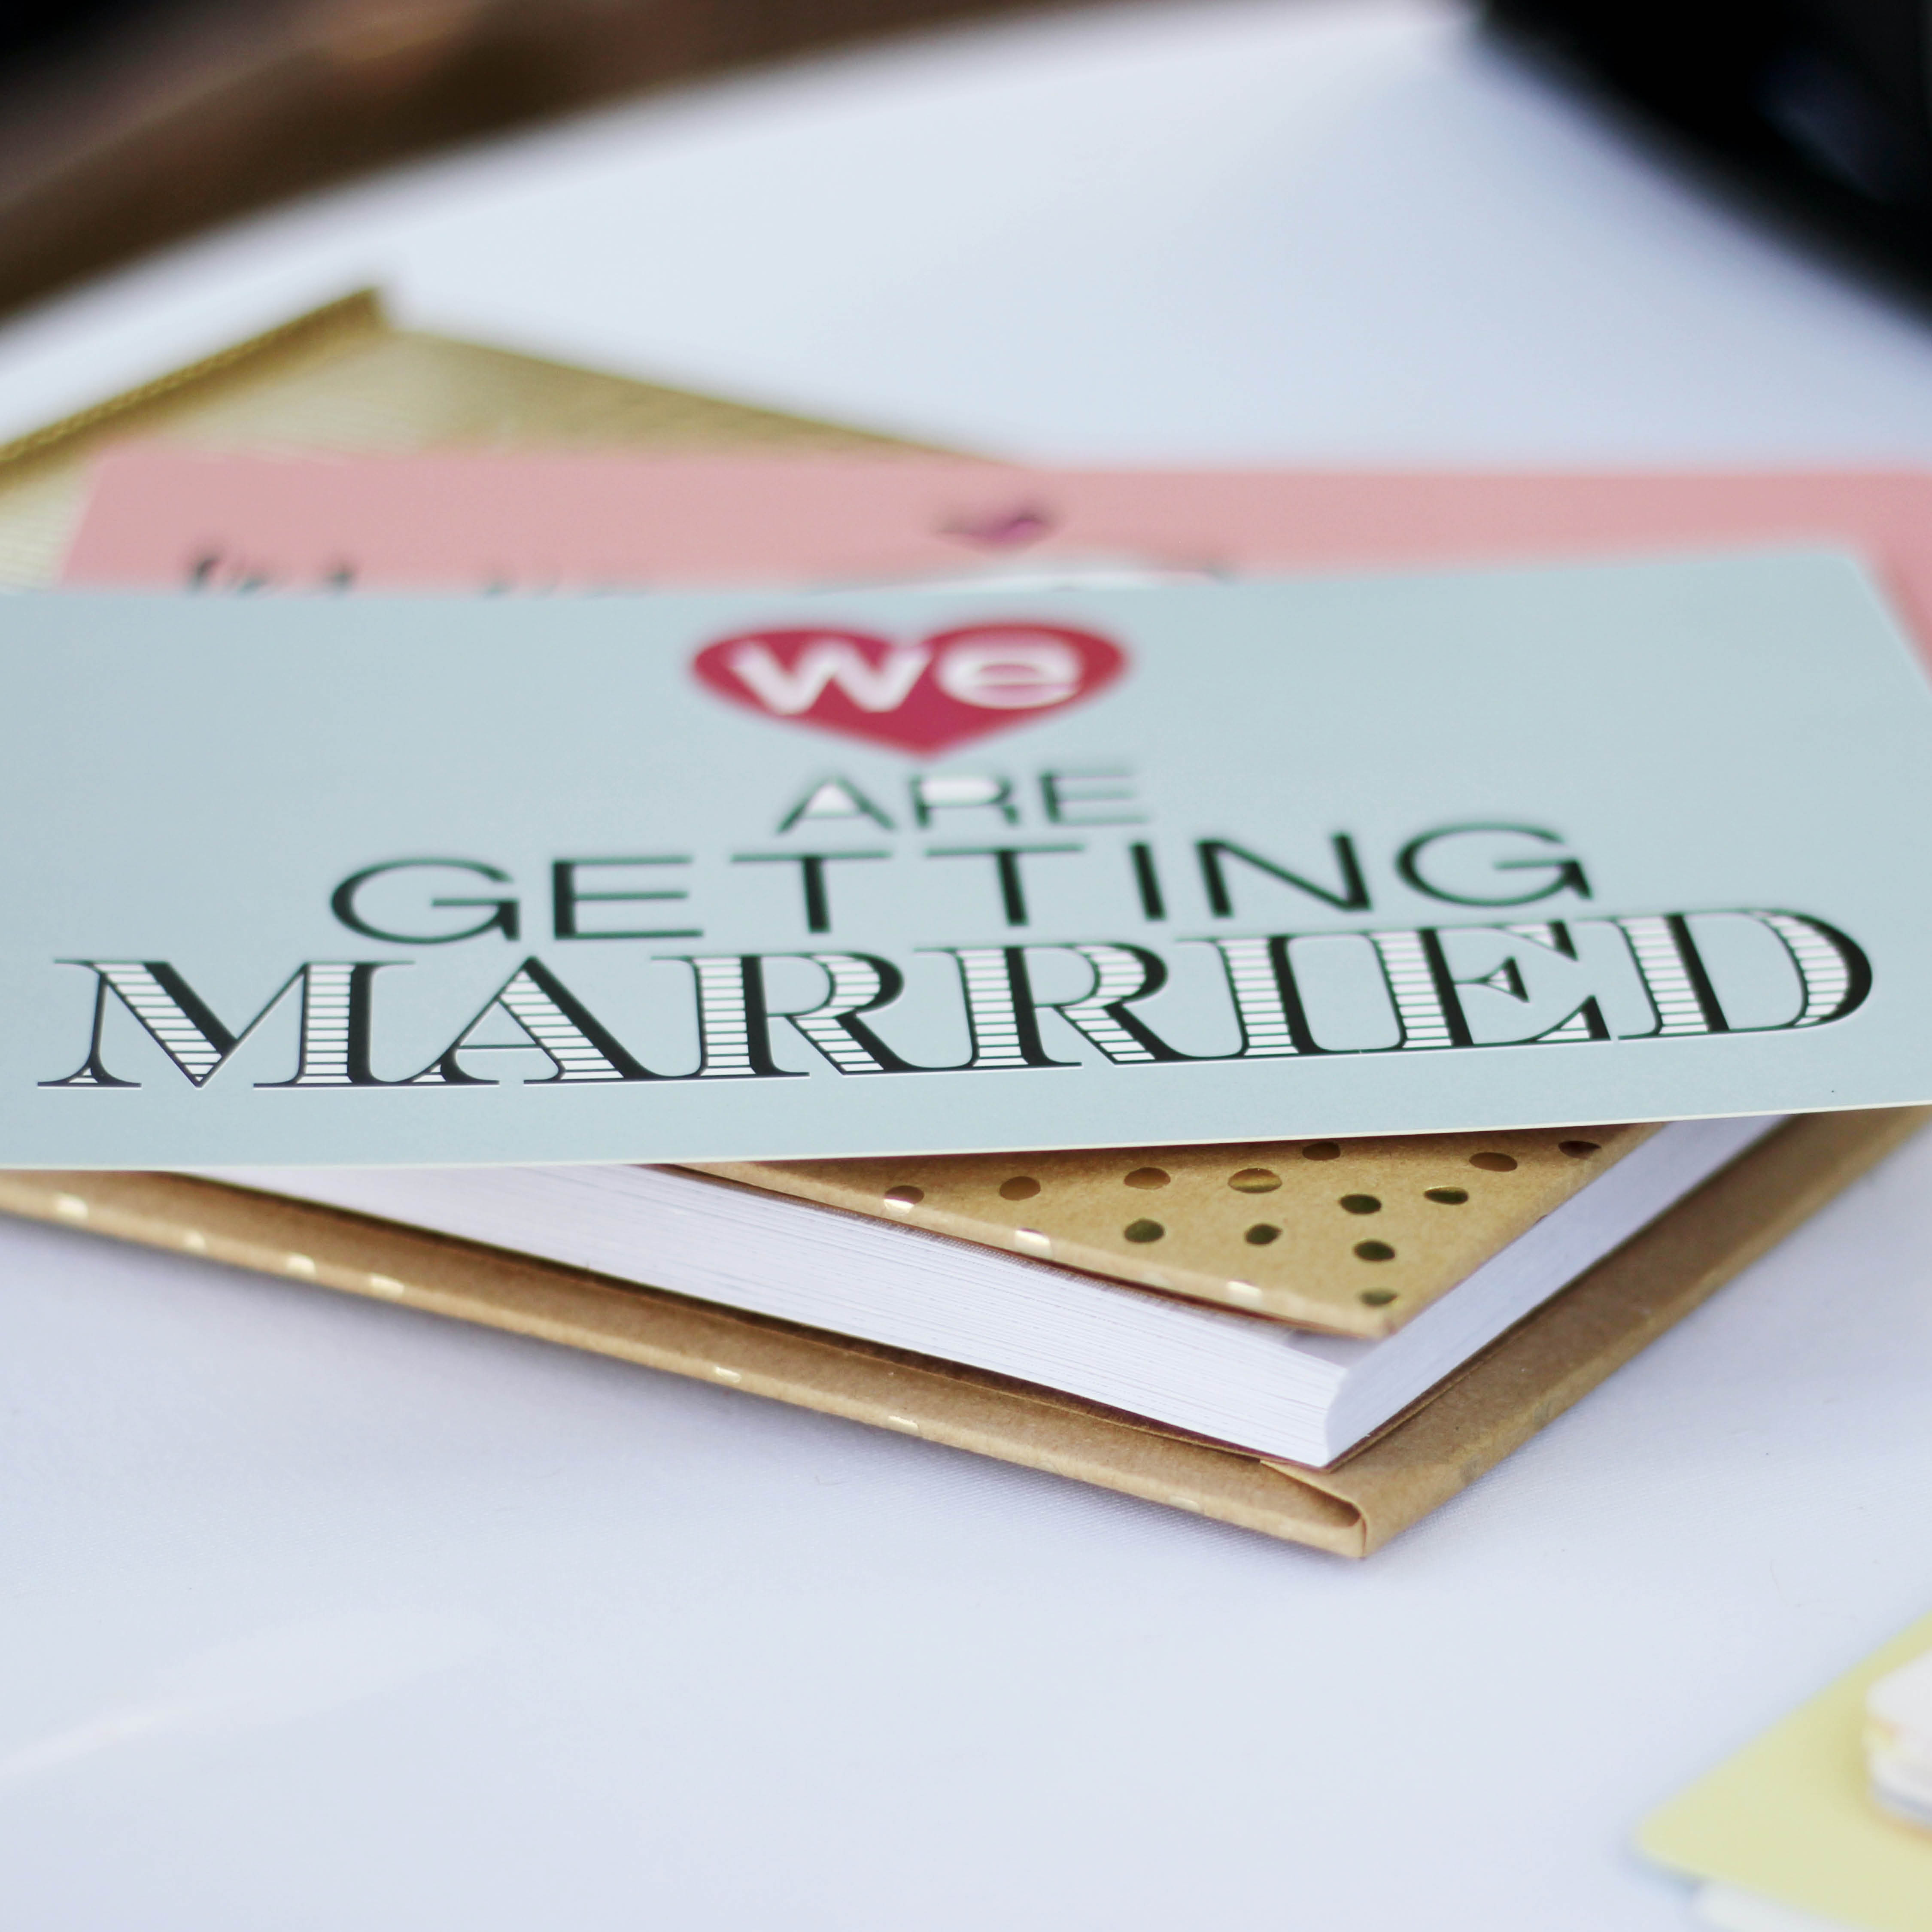 Things to consider when deciding on a wedding date, wedding budget